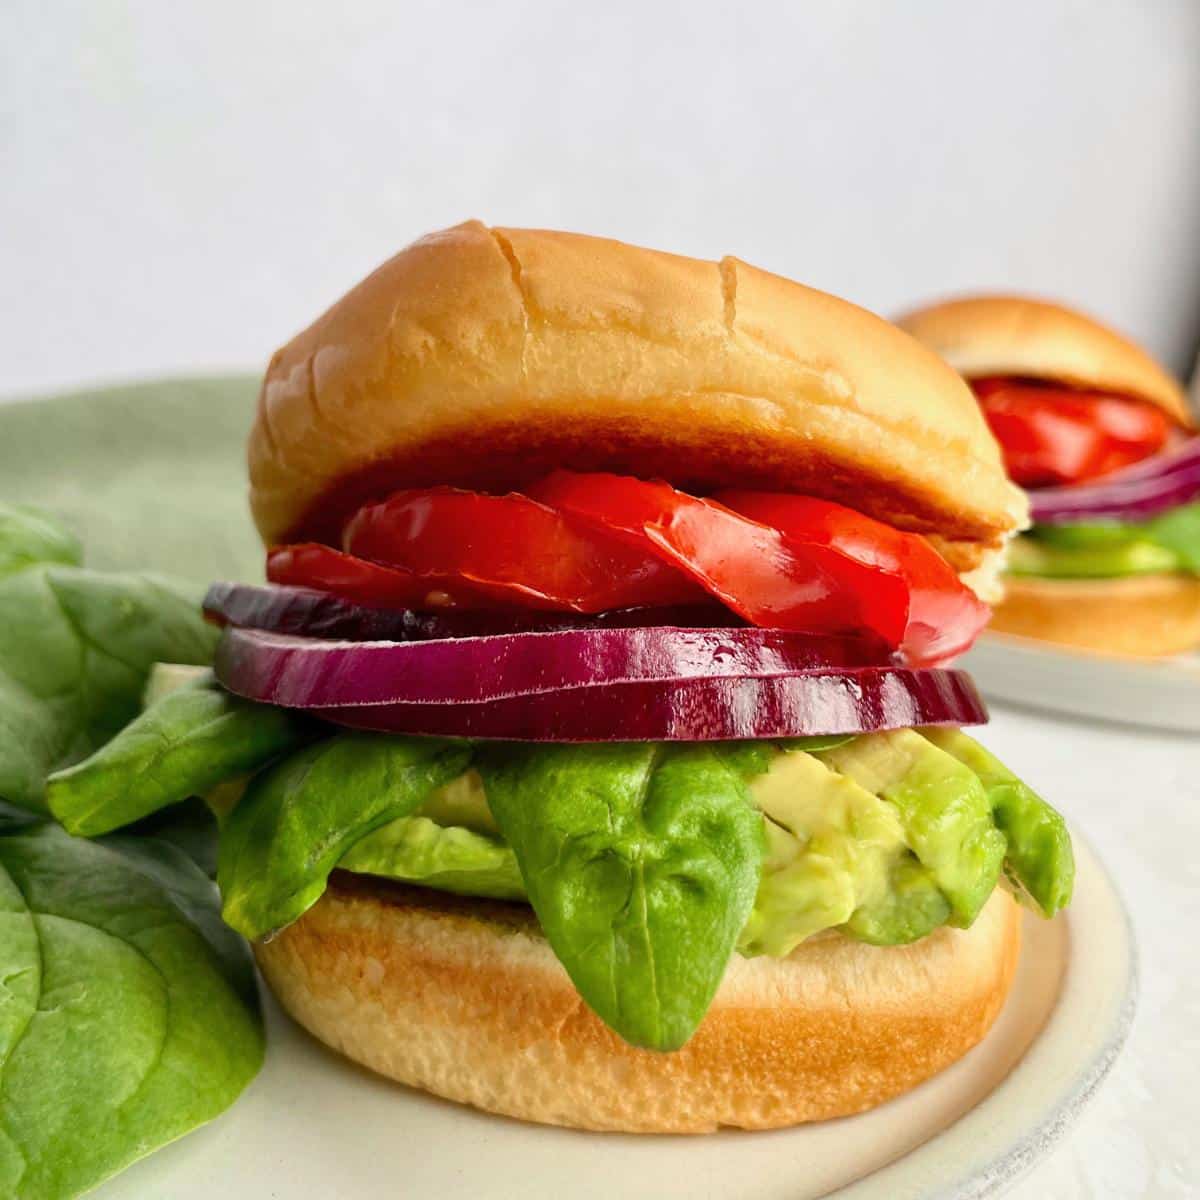 A roasted tomato sandwich with avocado, basil, and red onion.